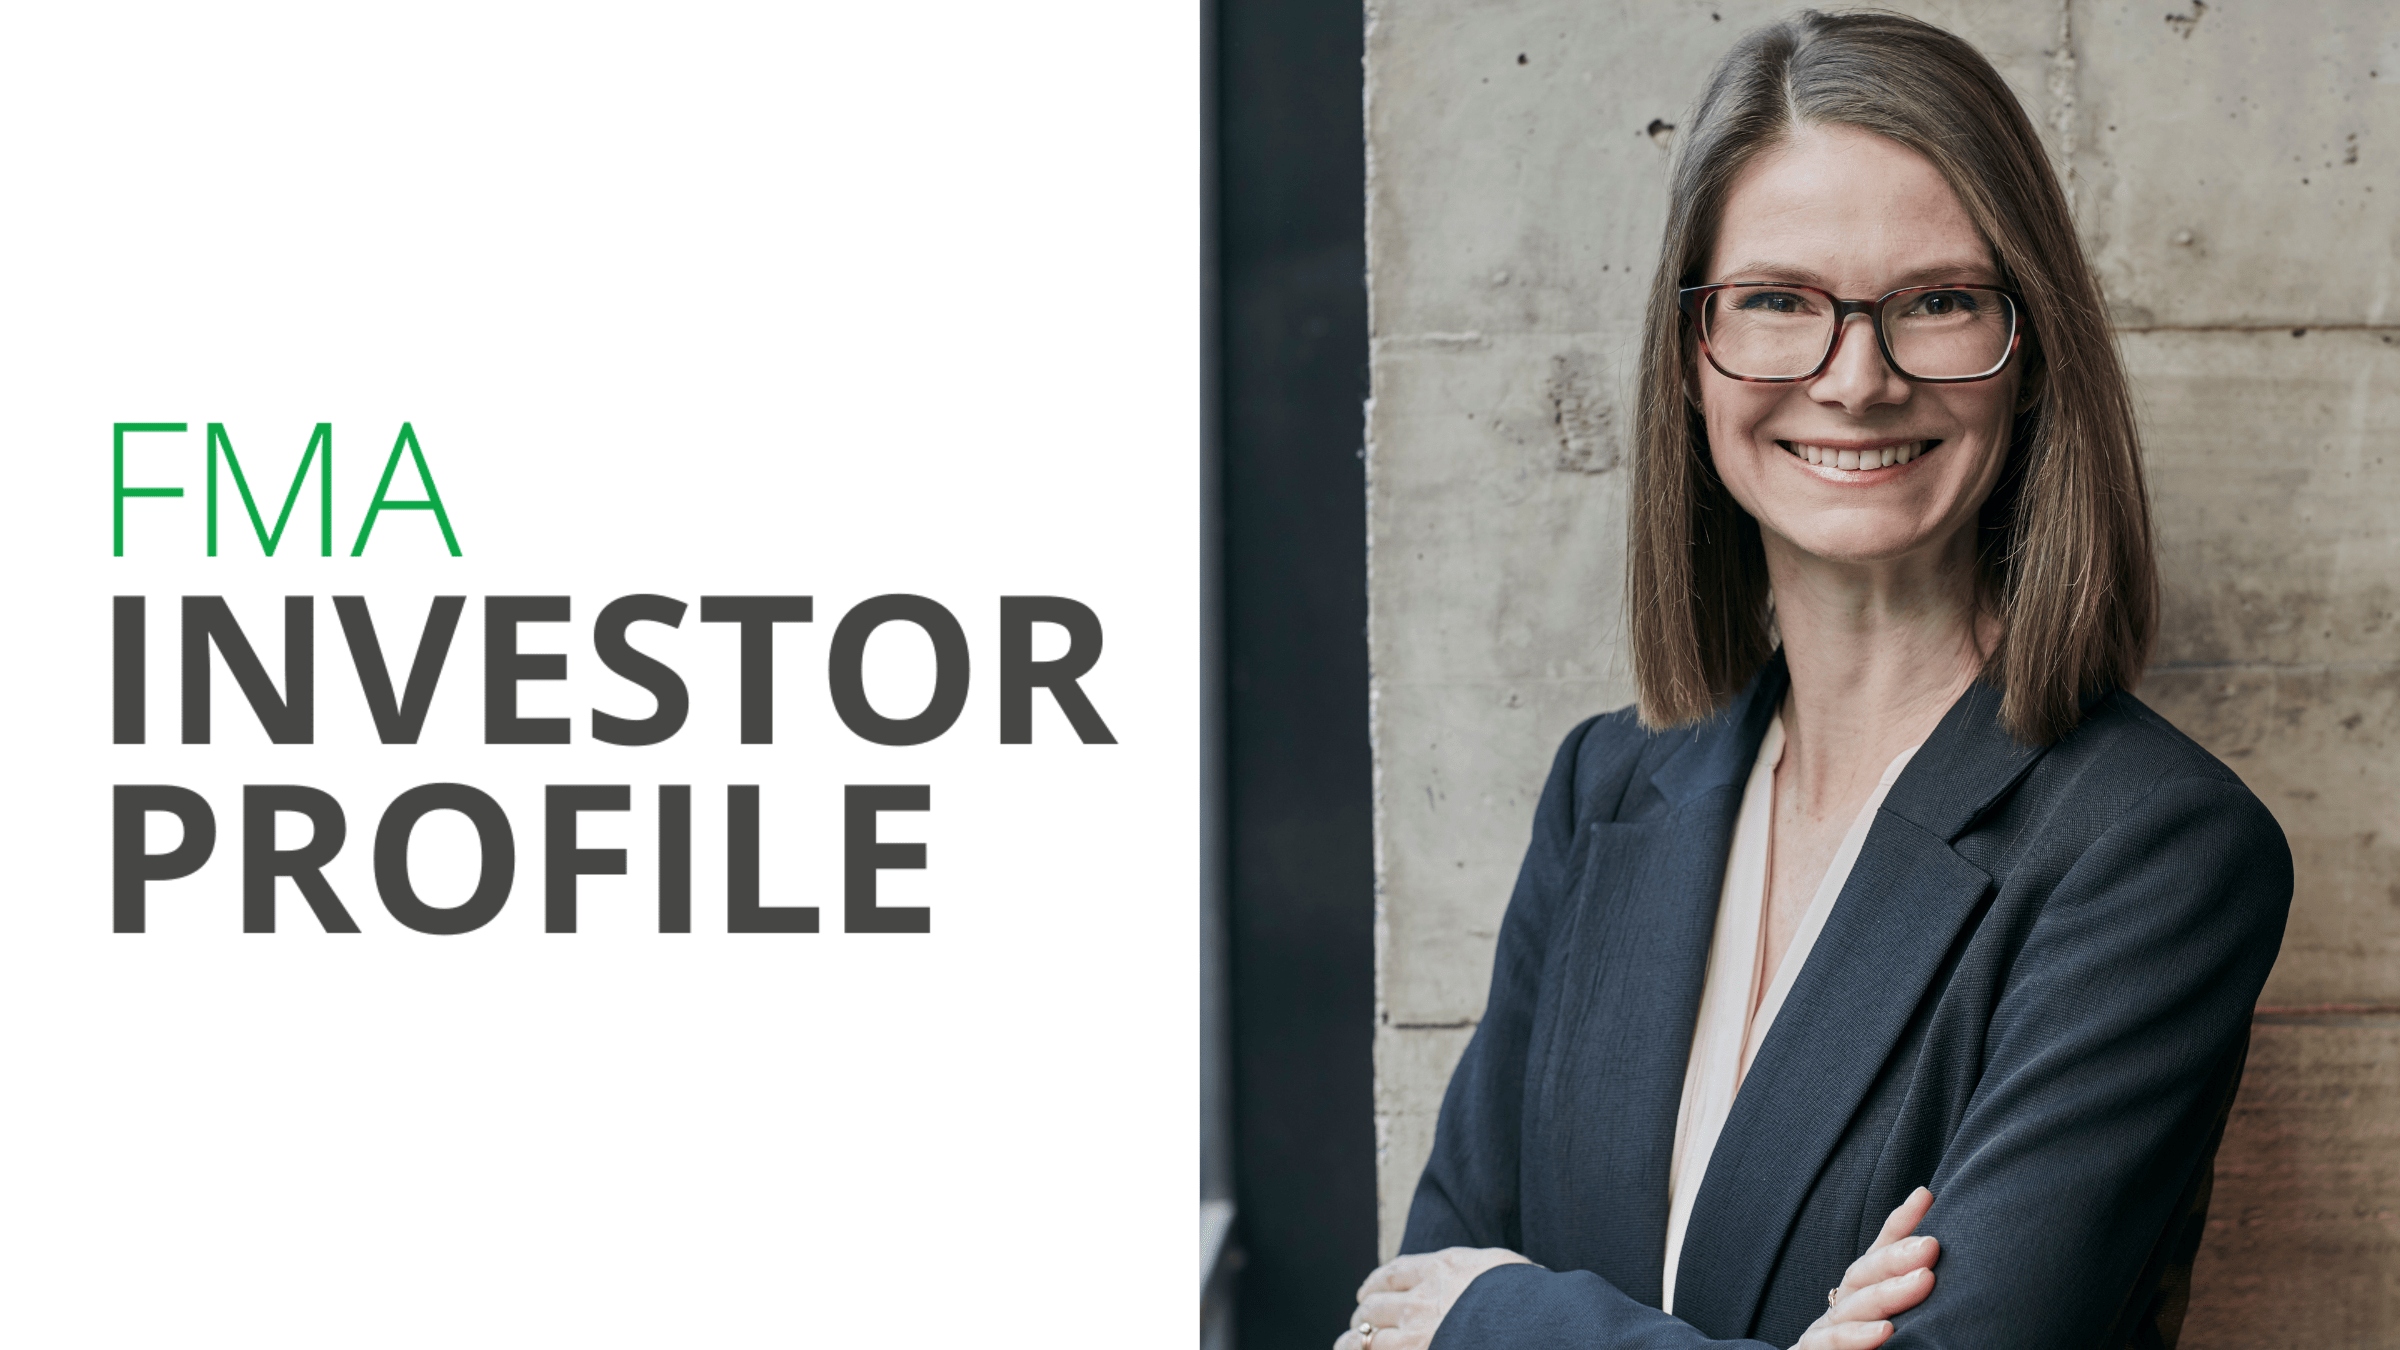 Ayesha Scott is the Deputy Director of Auckland Centre for Financial Research and Senior Lecturer at AUT. Together with her husband Guy, they are investing for their family’s future.   